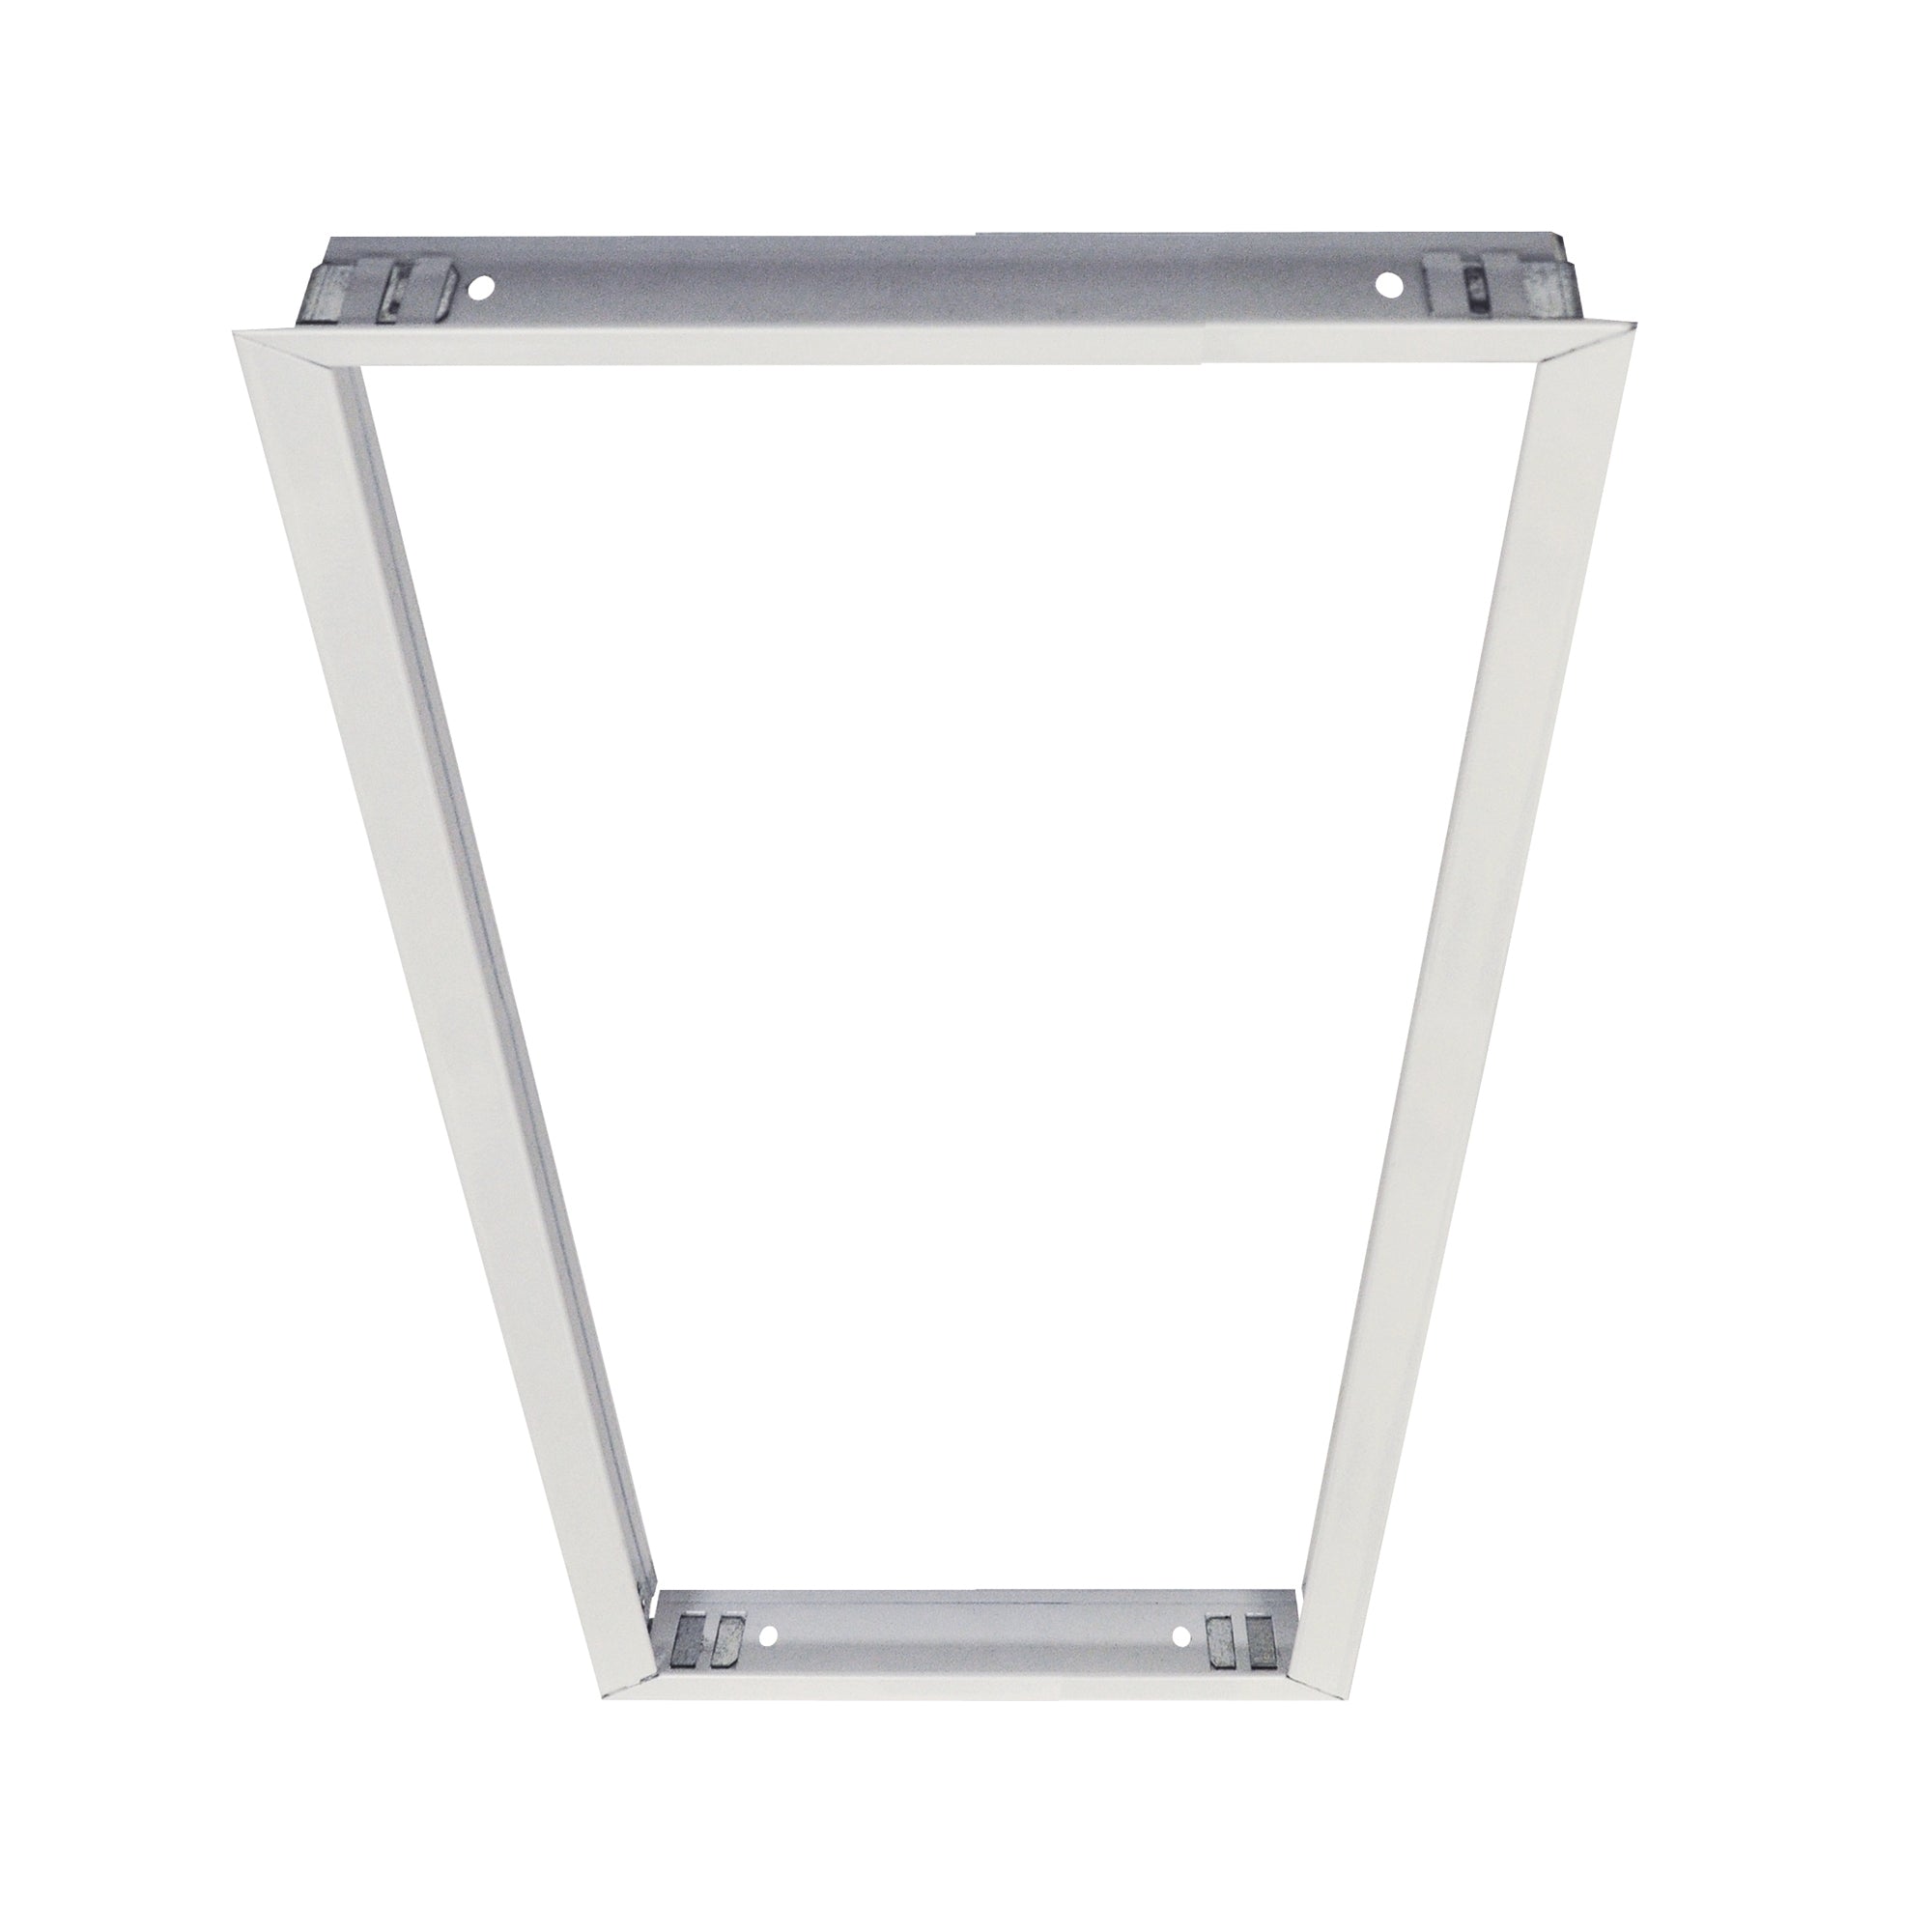 Nora Lighting LE24 - NPDBL-14RFK/W - Recessed - White